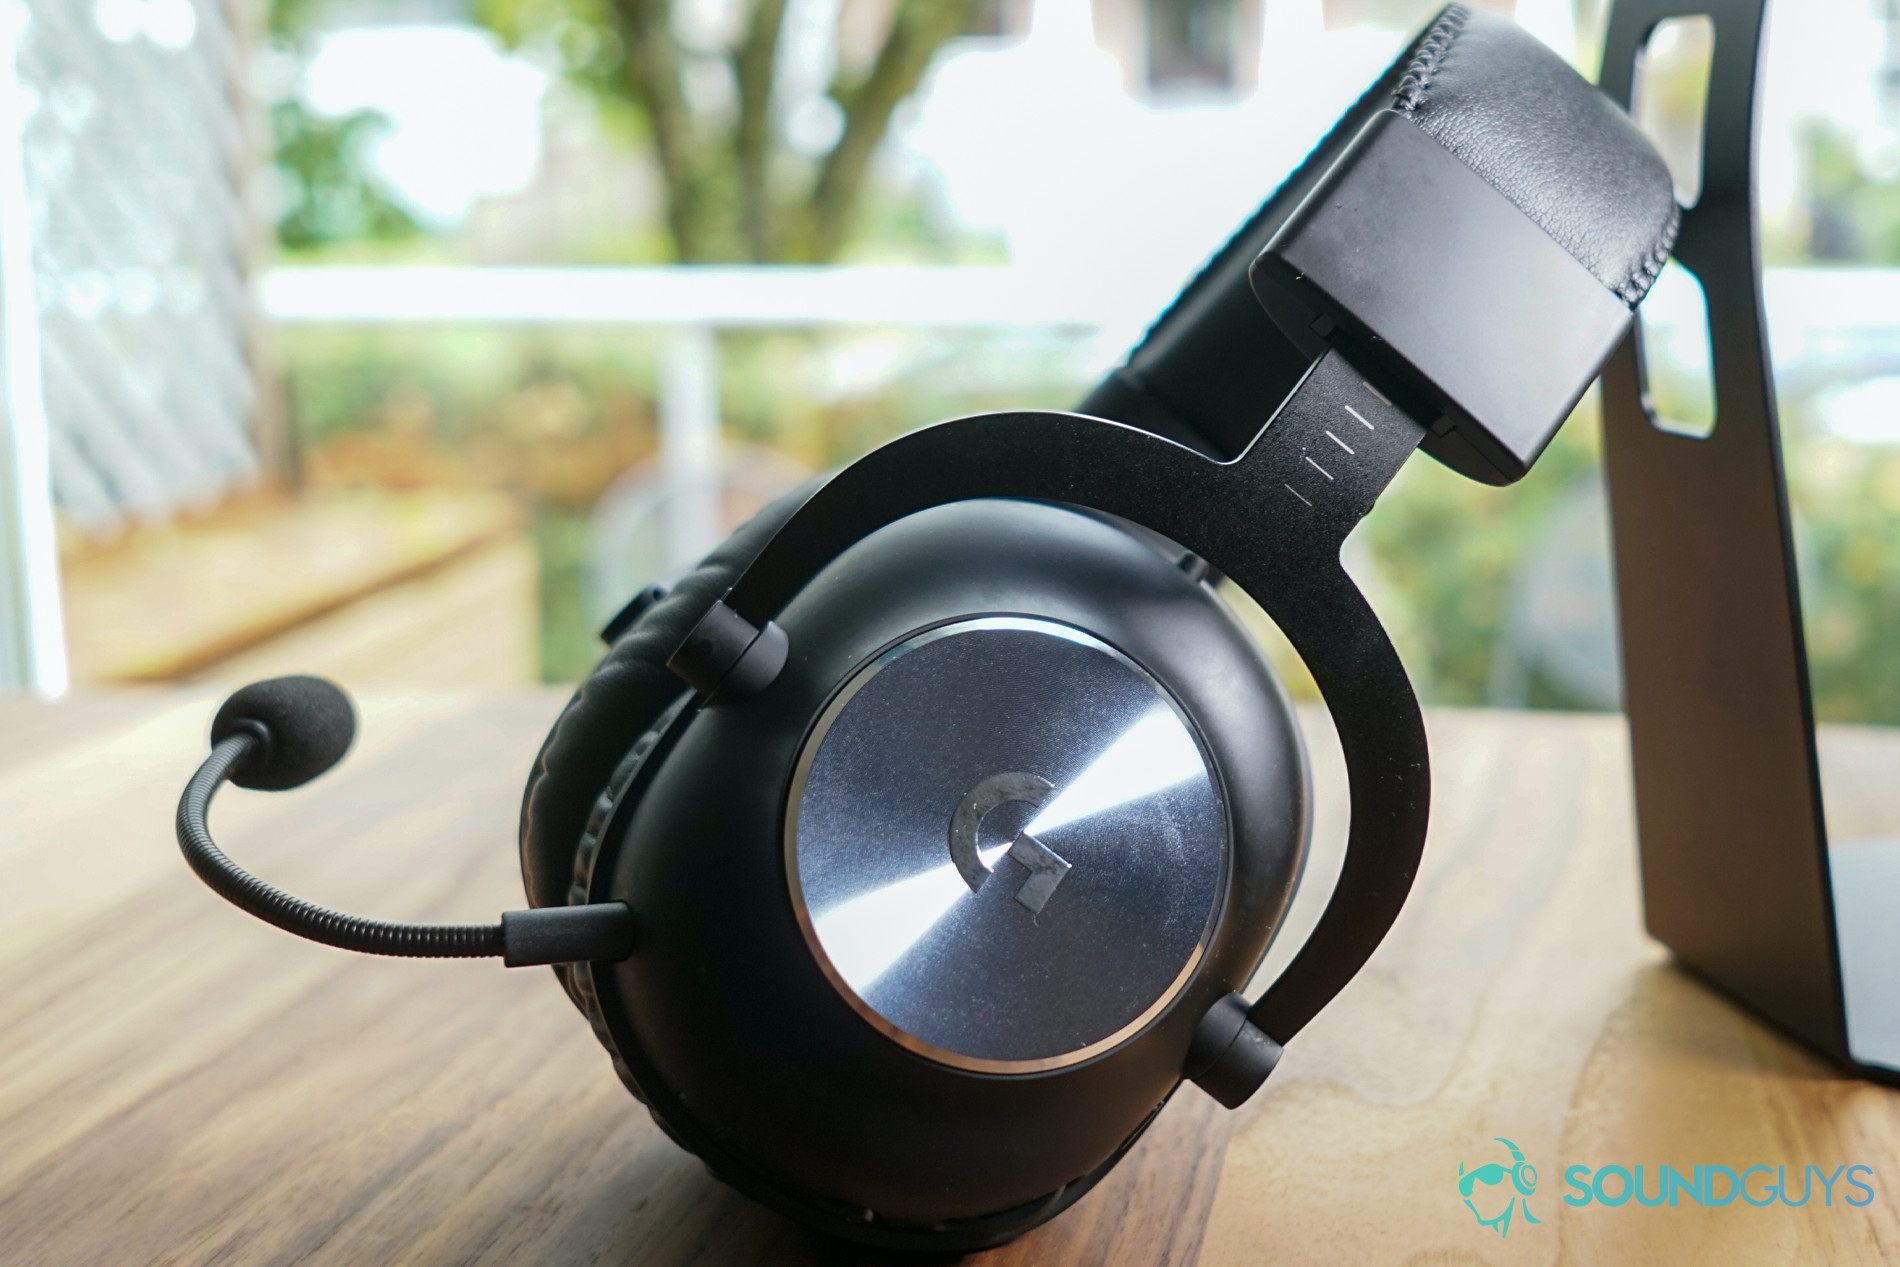 Logitech G Pro X review: A great PC and productivity headset - SoundGuys